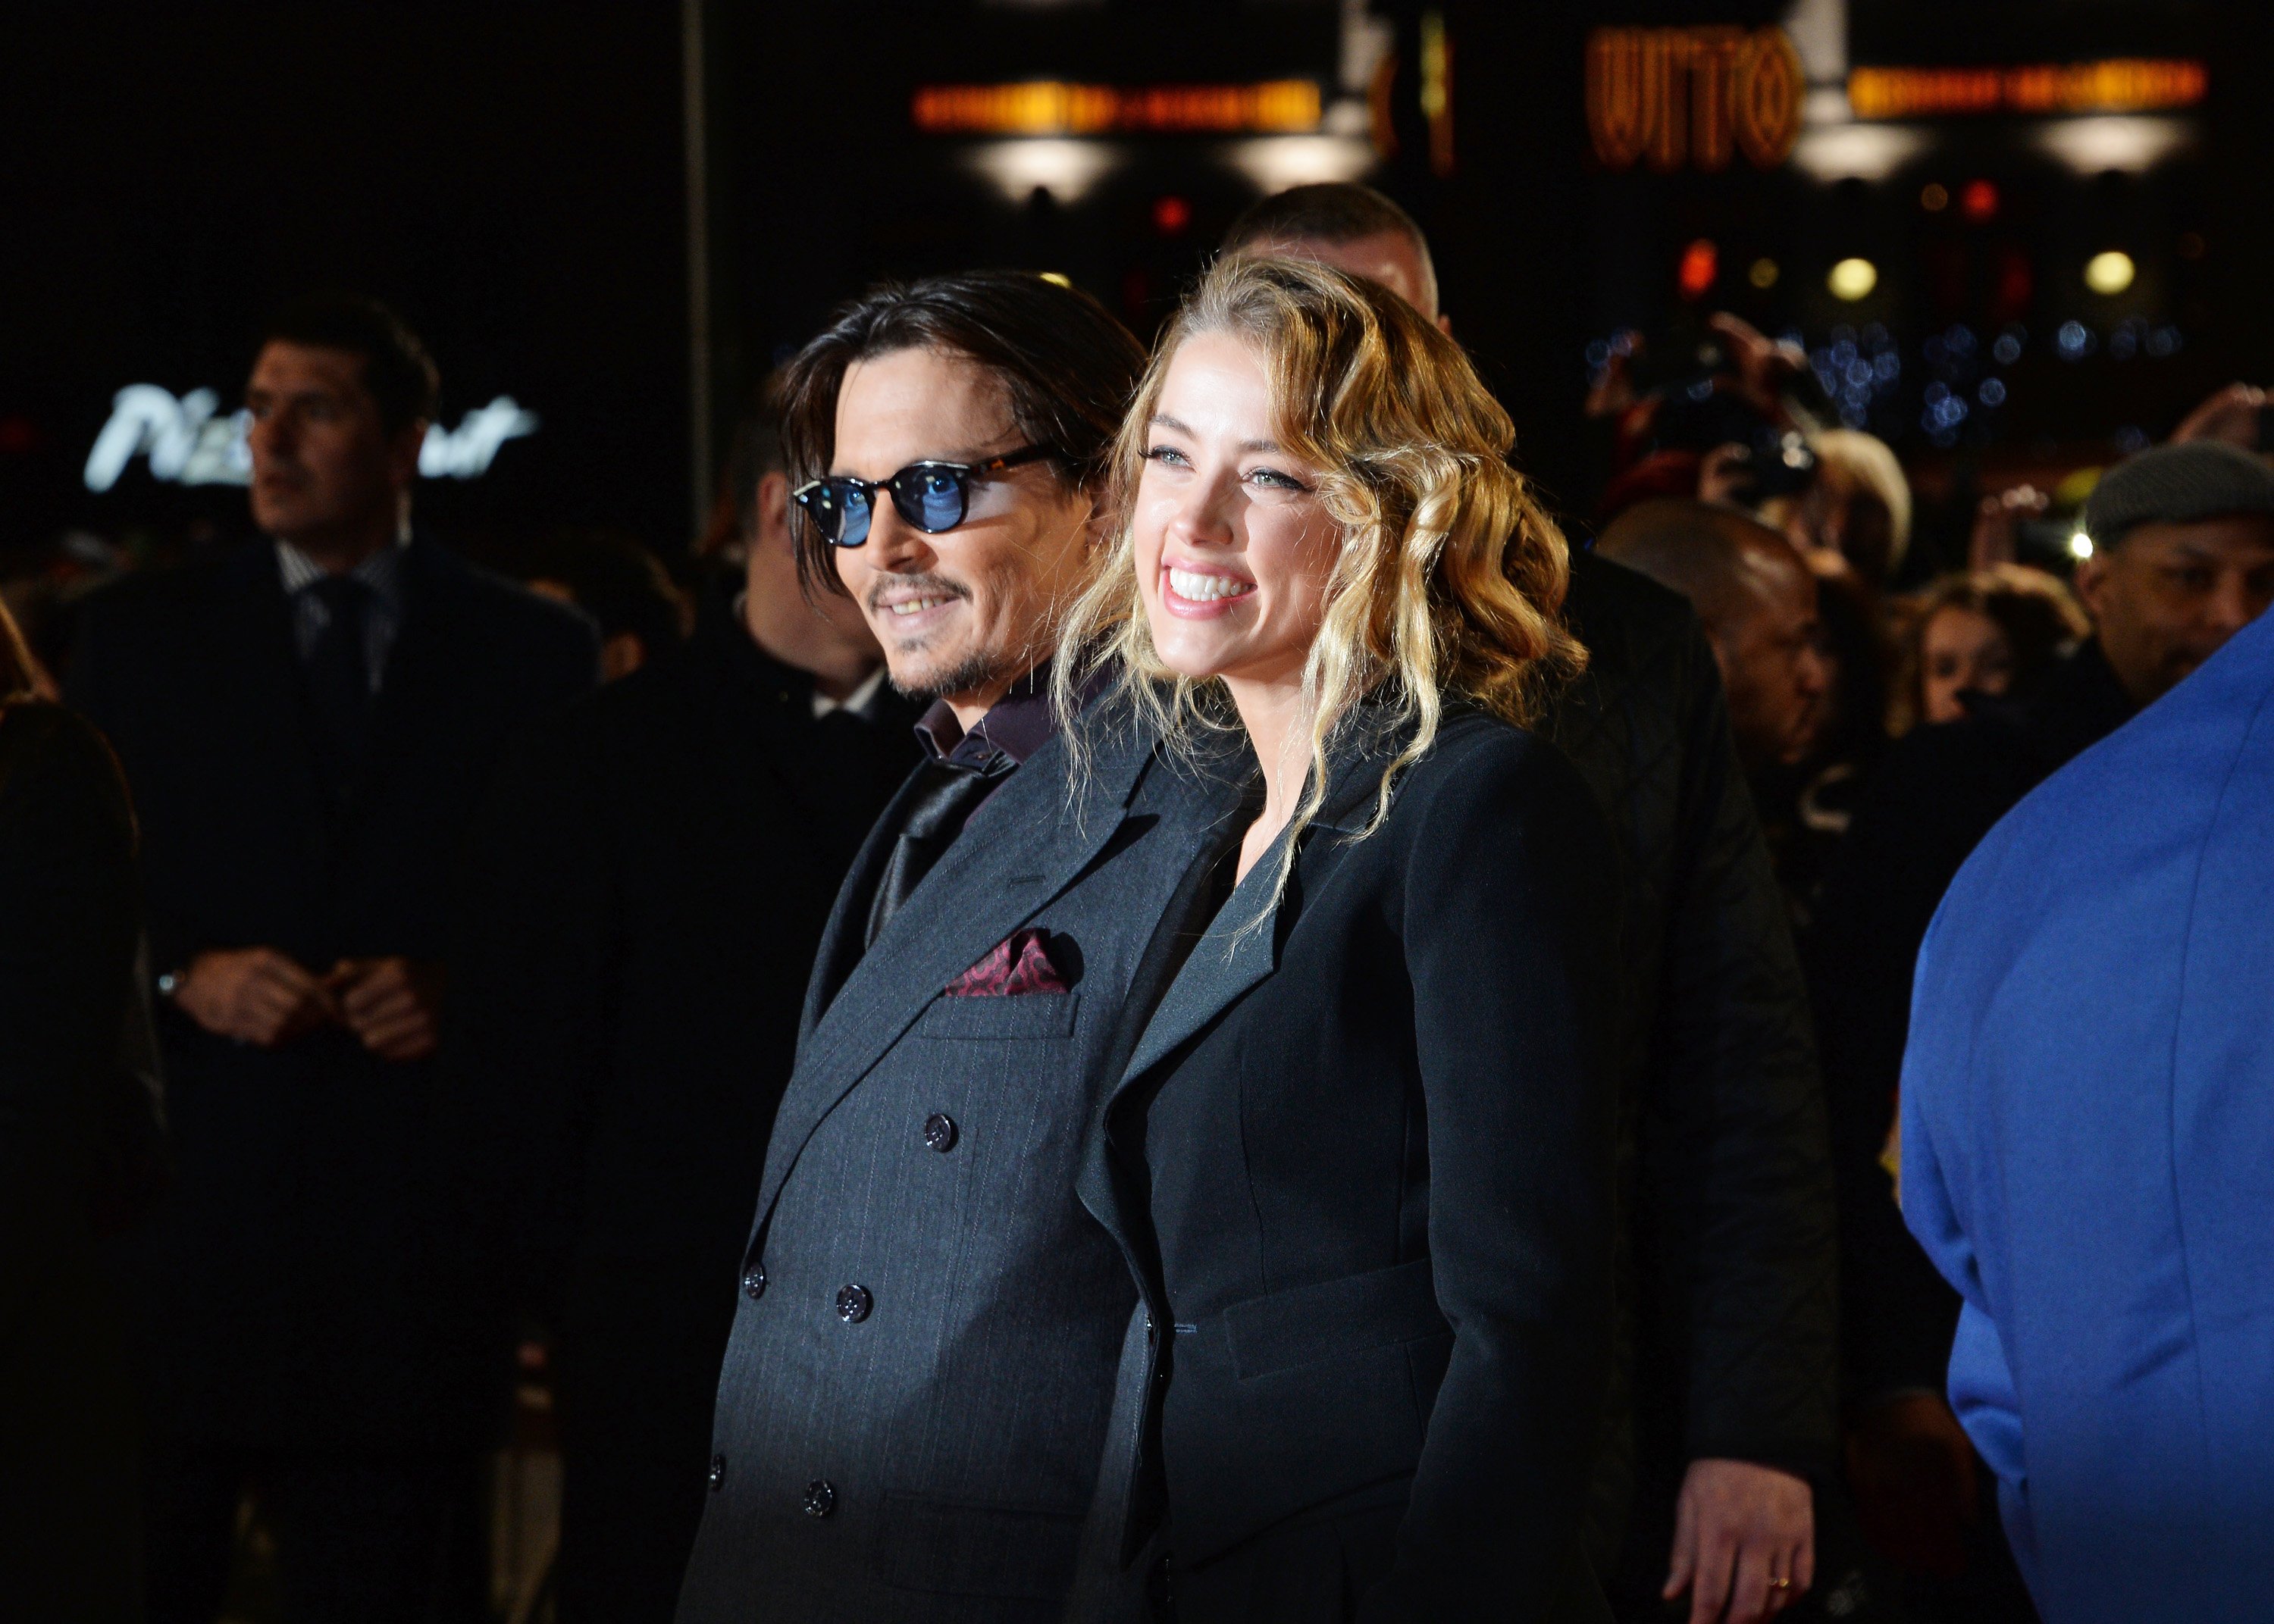 Johnny Depp and Amber Heard attend the UK Premiere of "Mortdecai" at Empire Leicester Square on January 19, 2015, in London, England. | Source: Getty Images